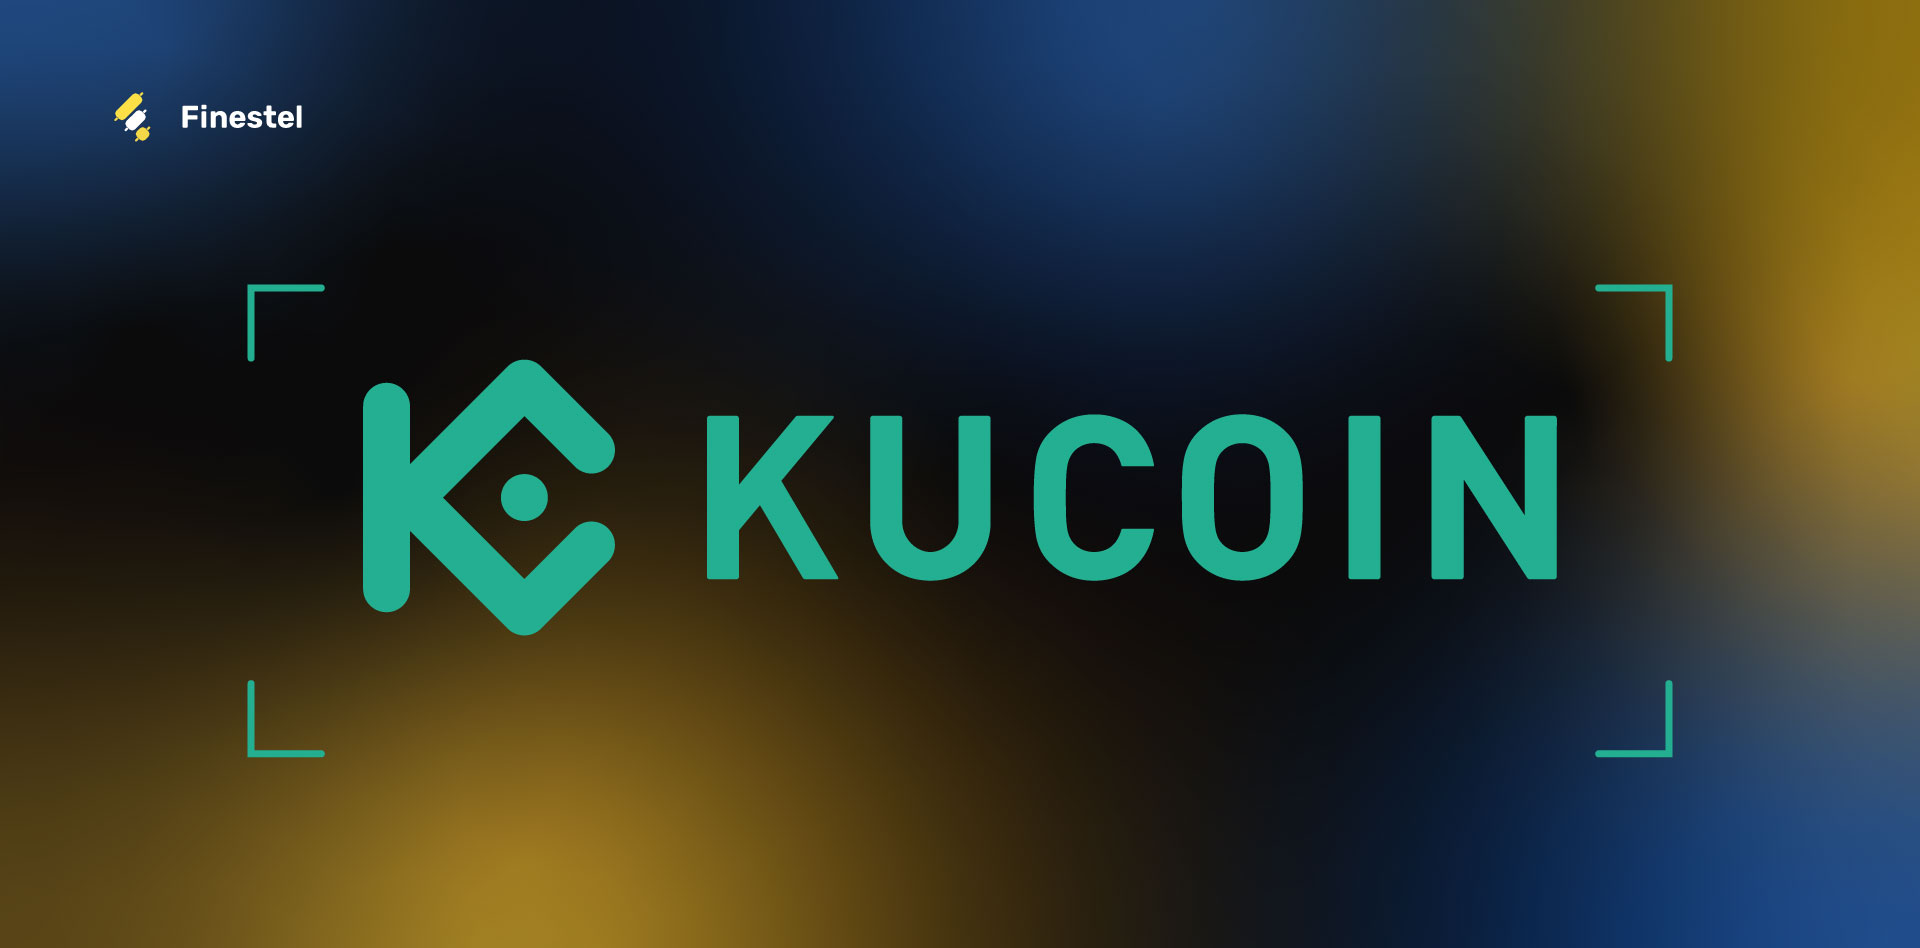 KuCoin: A Brief History and Introduction